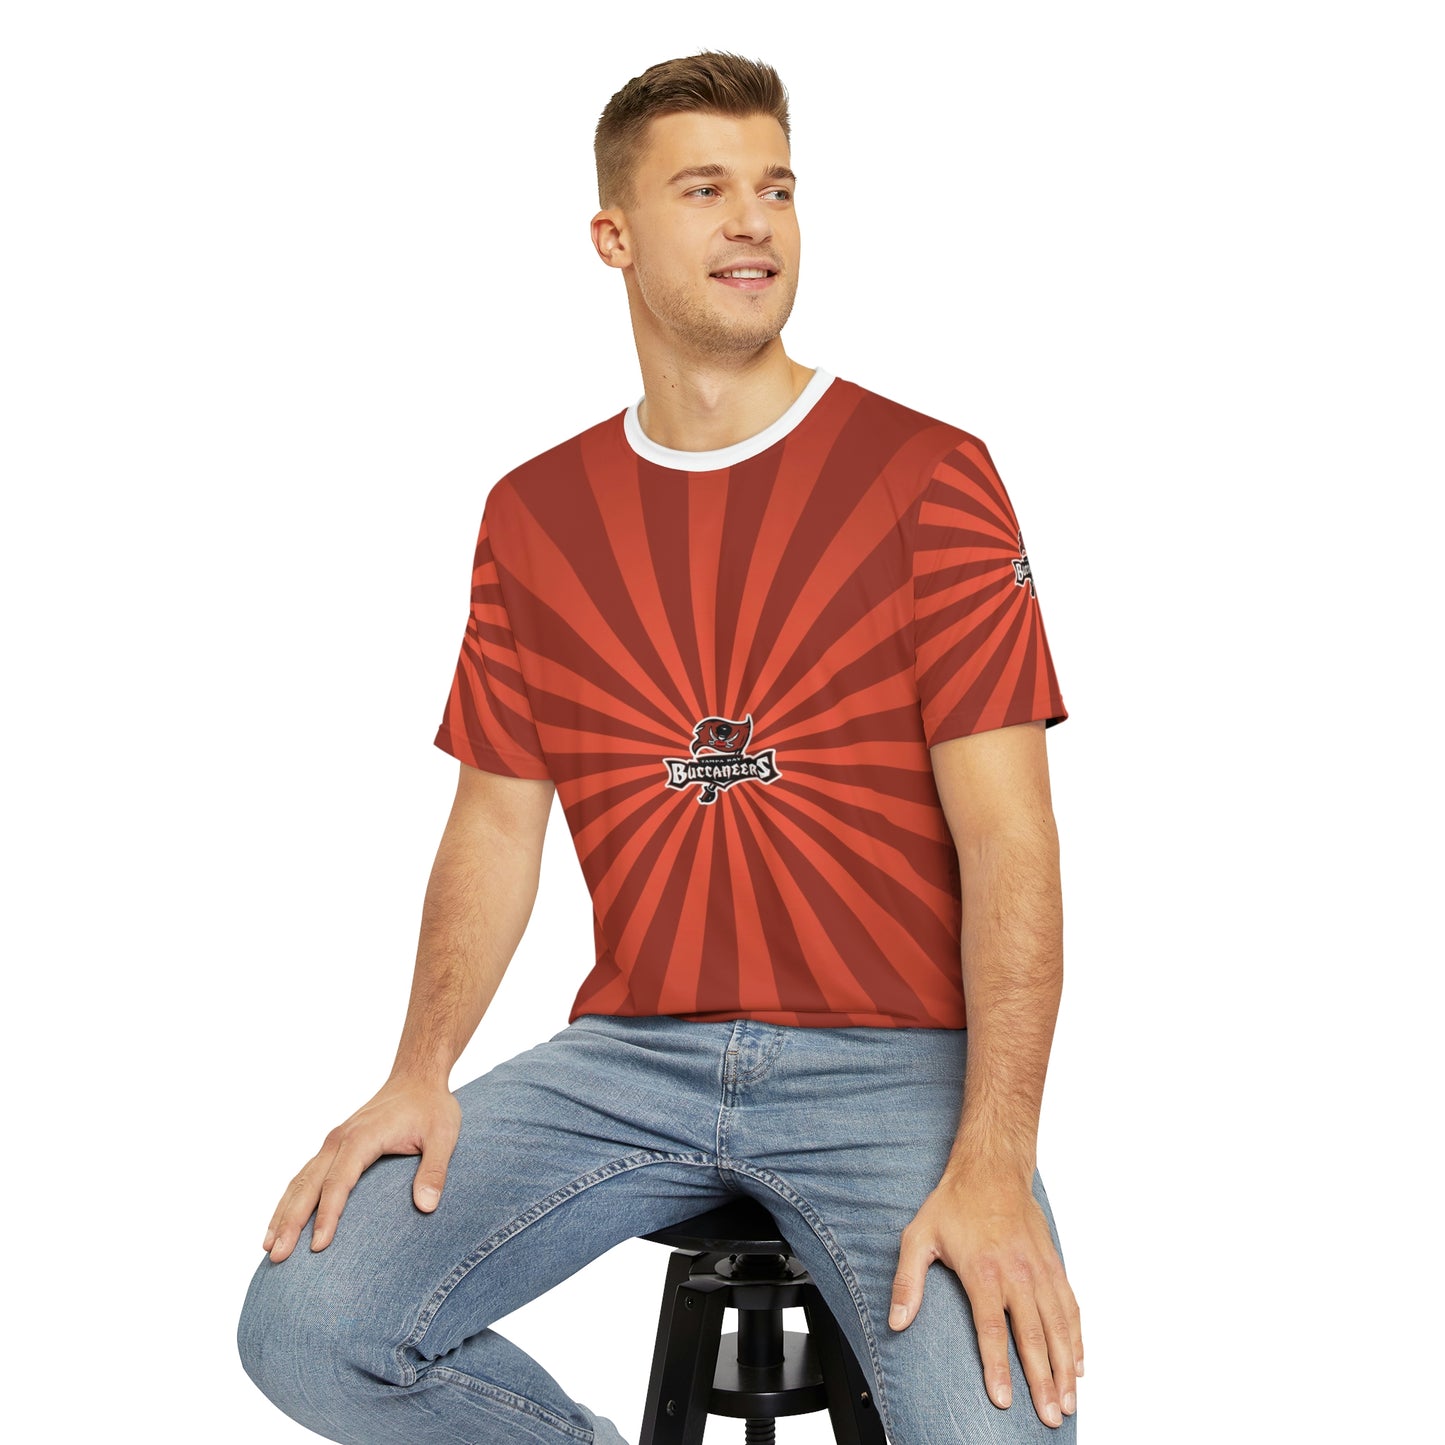 Geotrott NFL NO NAME1 Men's Polyester All Over Print Tee T-Shirt